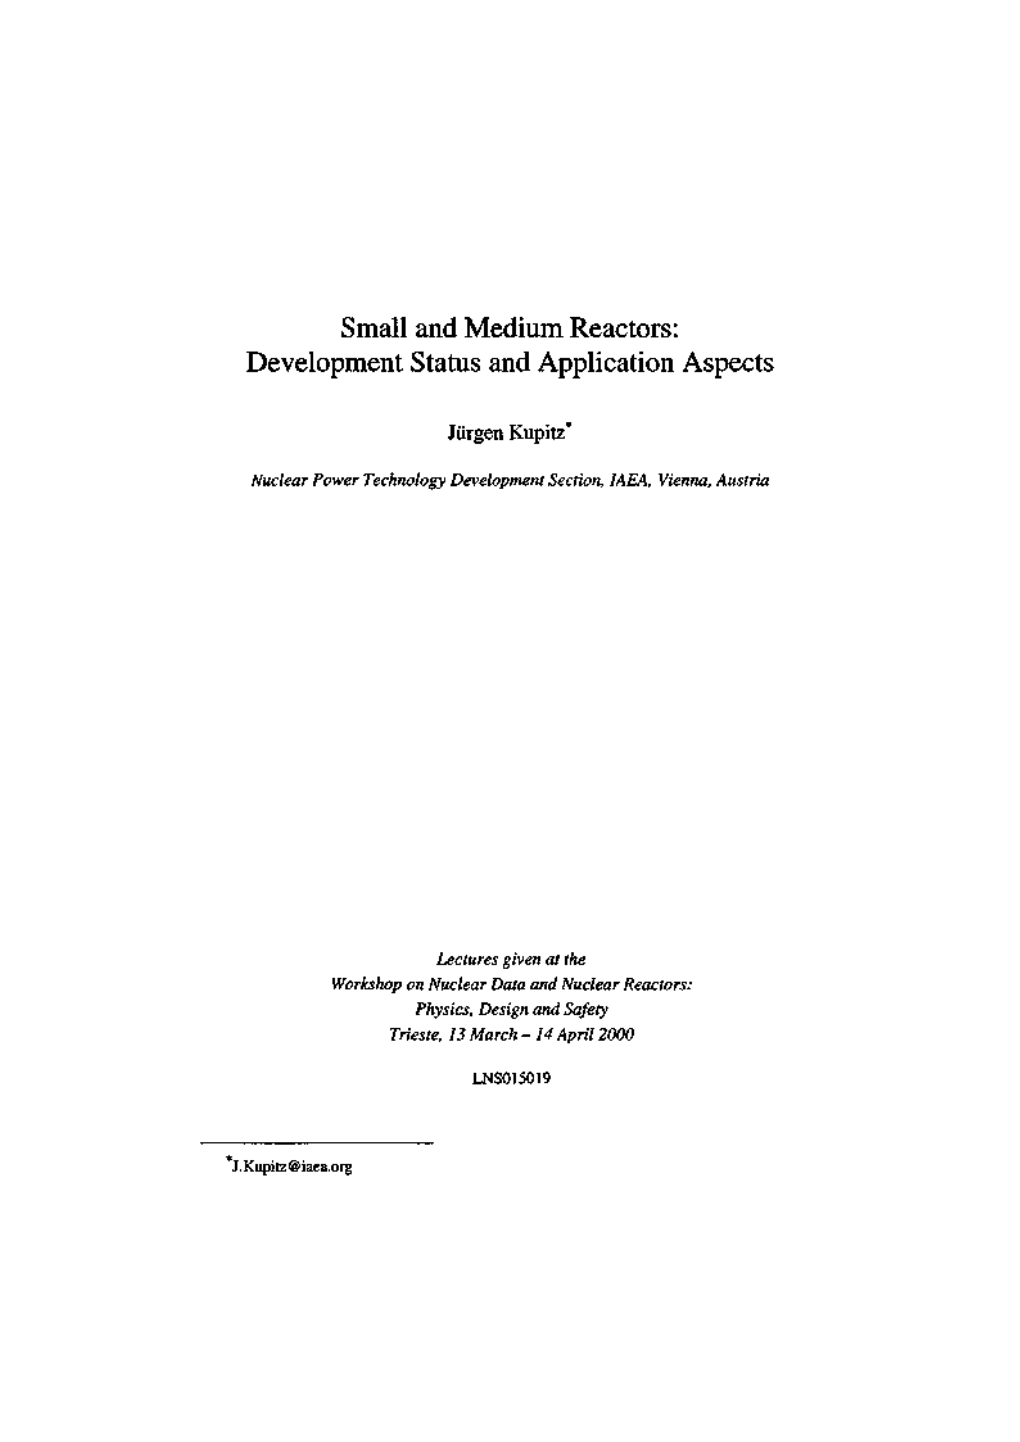 Small and Medium Reactors: Development Status and Application Aspects